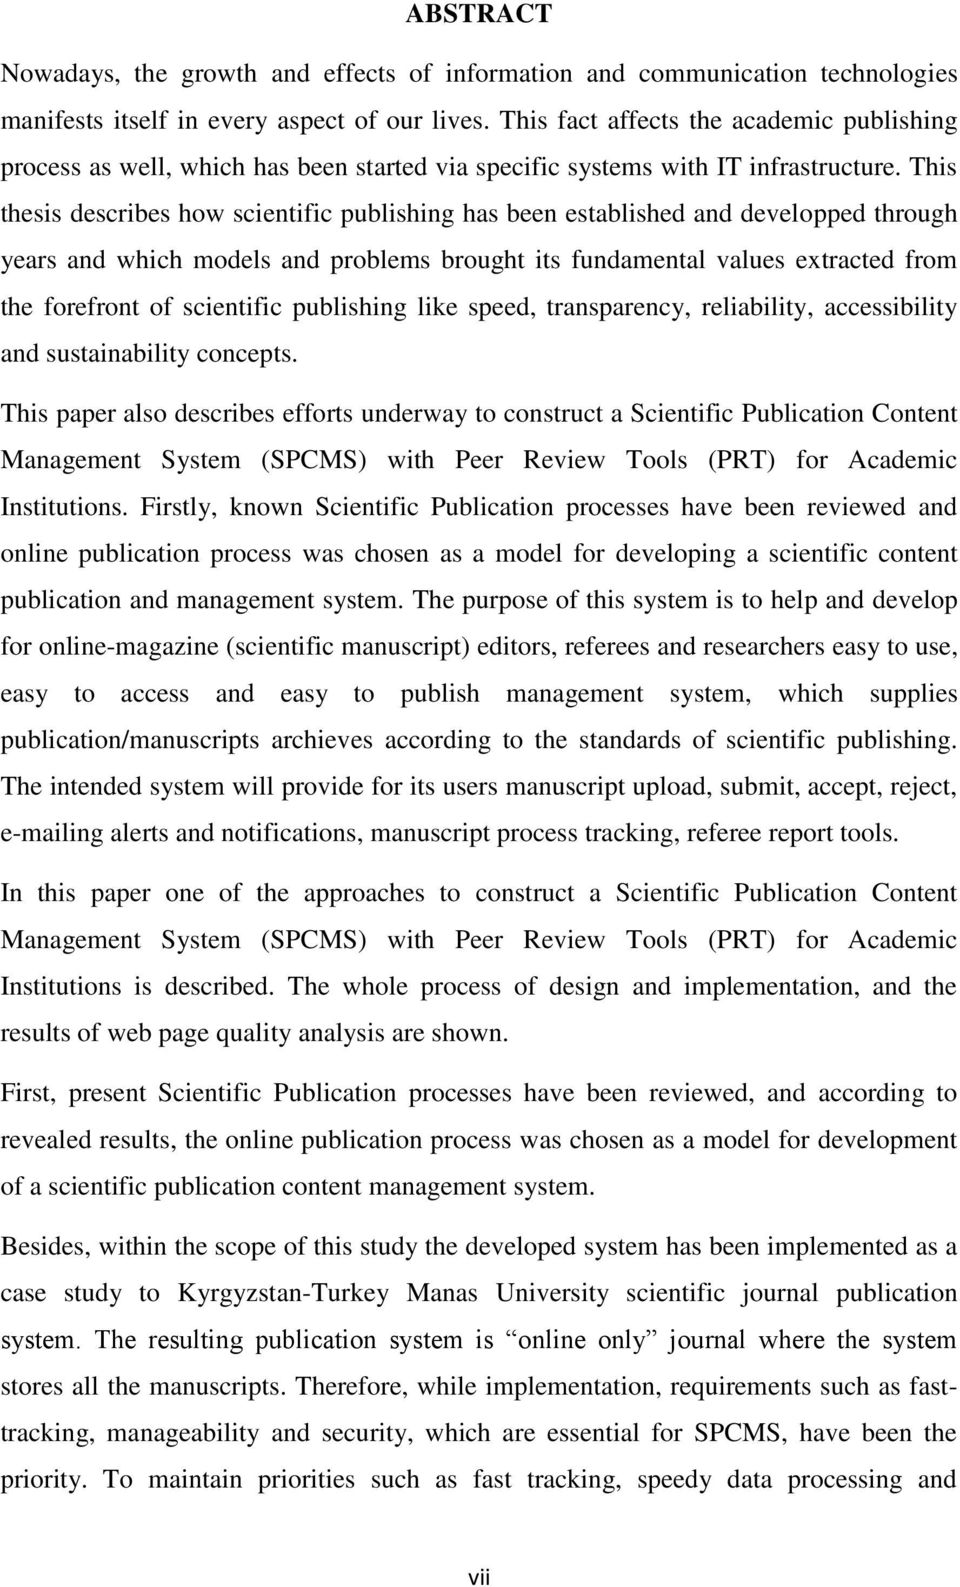 This thesis describes how scientific publishing has been established and developped through years and which models and problems brought its fundamental values extracted from the forefront of